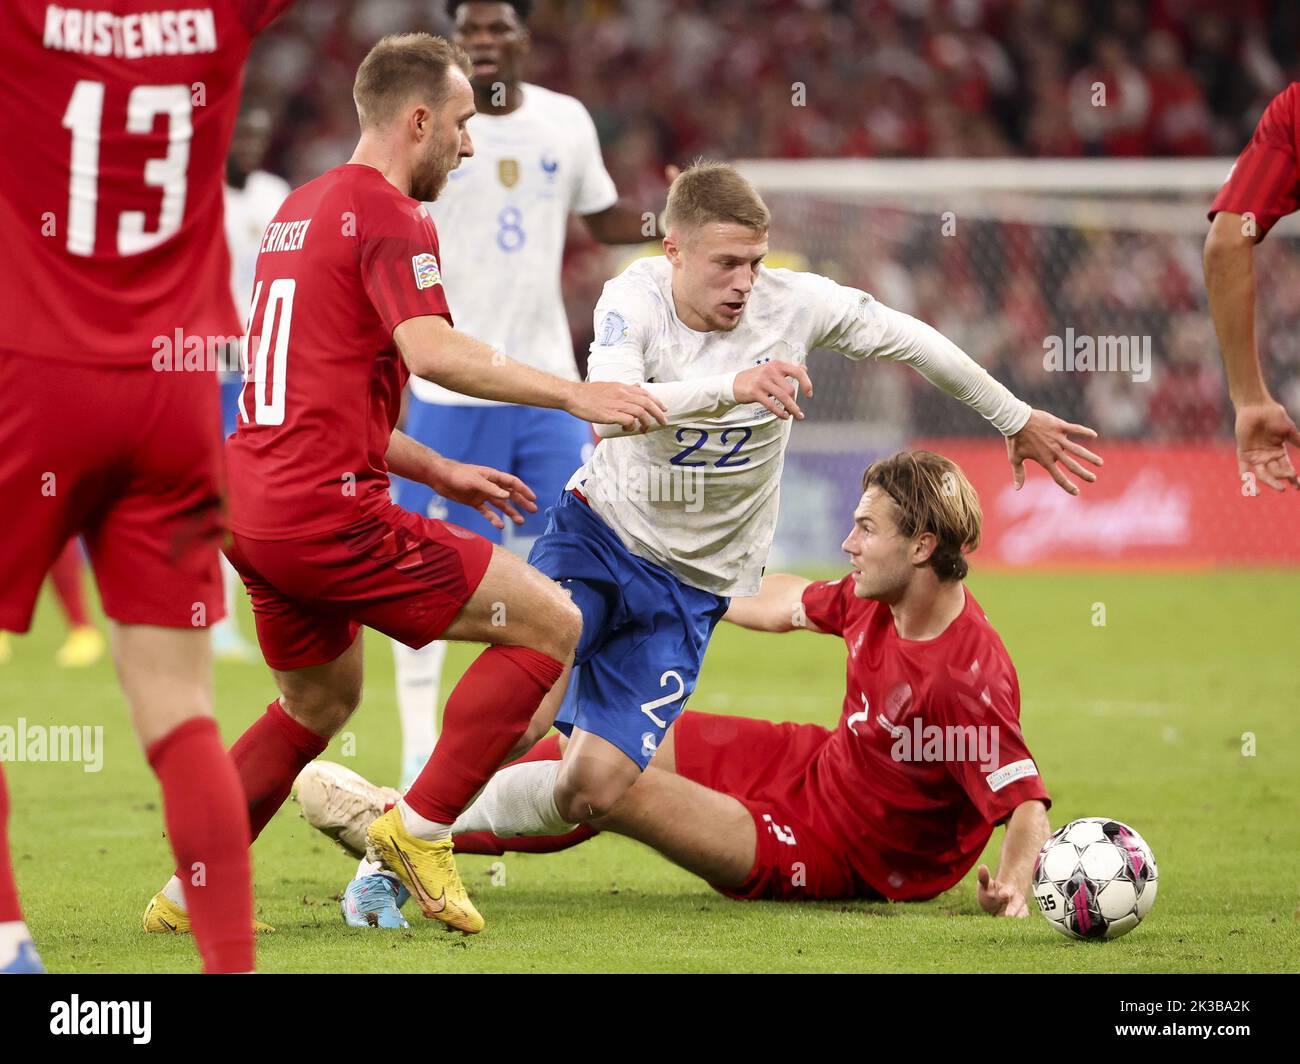 Copenhagen, Denmark. 25th September, 2022. Adrien Truffert of France during the UEFA Nations League, League A - Group 1 football match between Denmark and France on September 25, 2022 at Parken Stadium in Copenhagen, Denmark - Photo: Jean Catuffe/DPPI/LiveMedia Credit: Independent Photo Agency/Alamy Live News Stock Photo